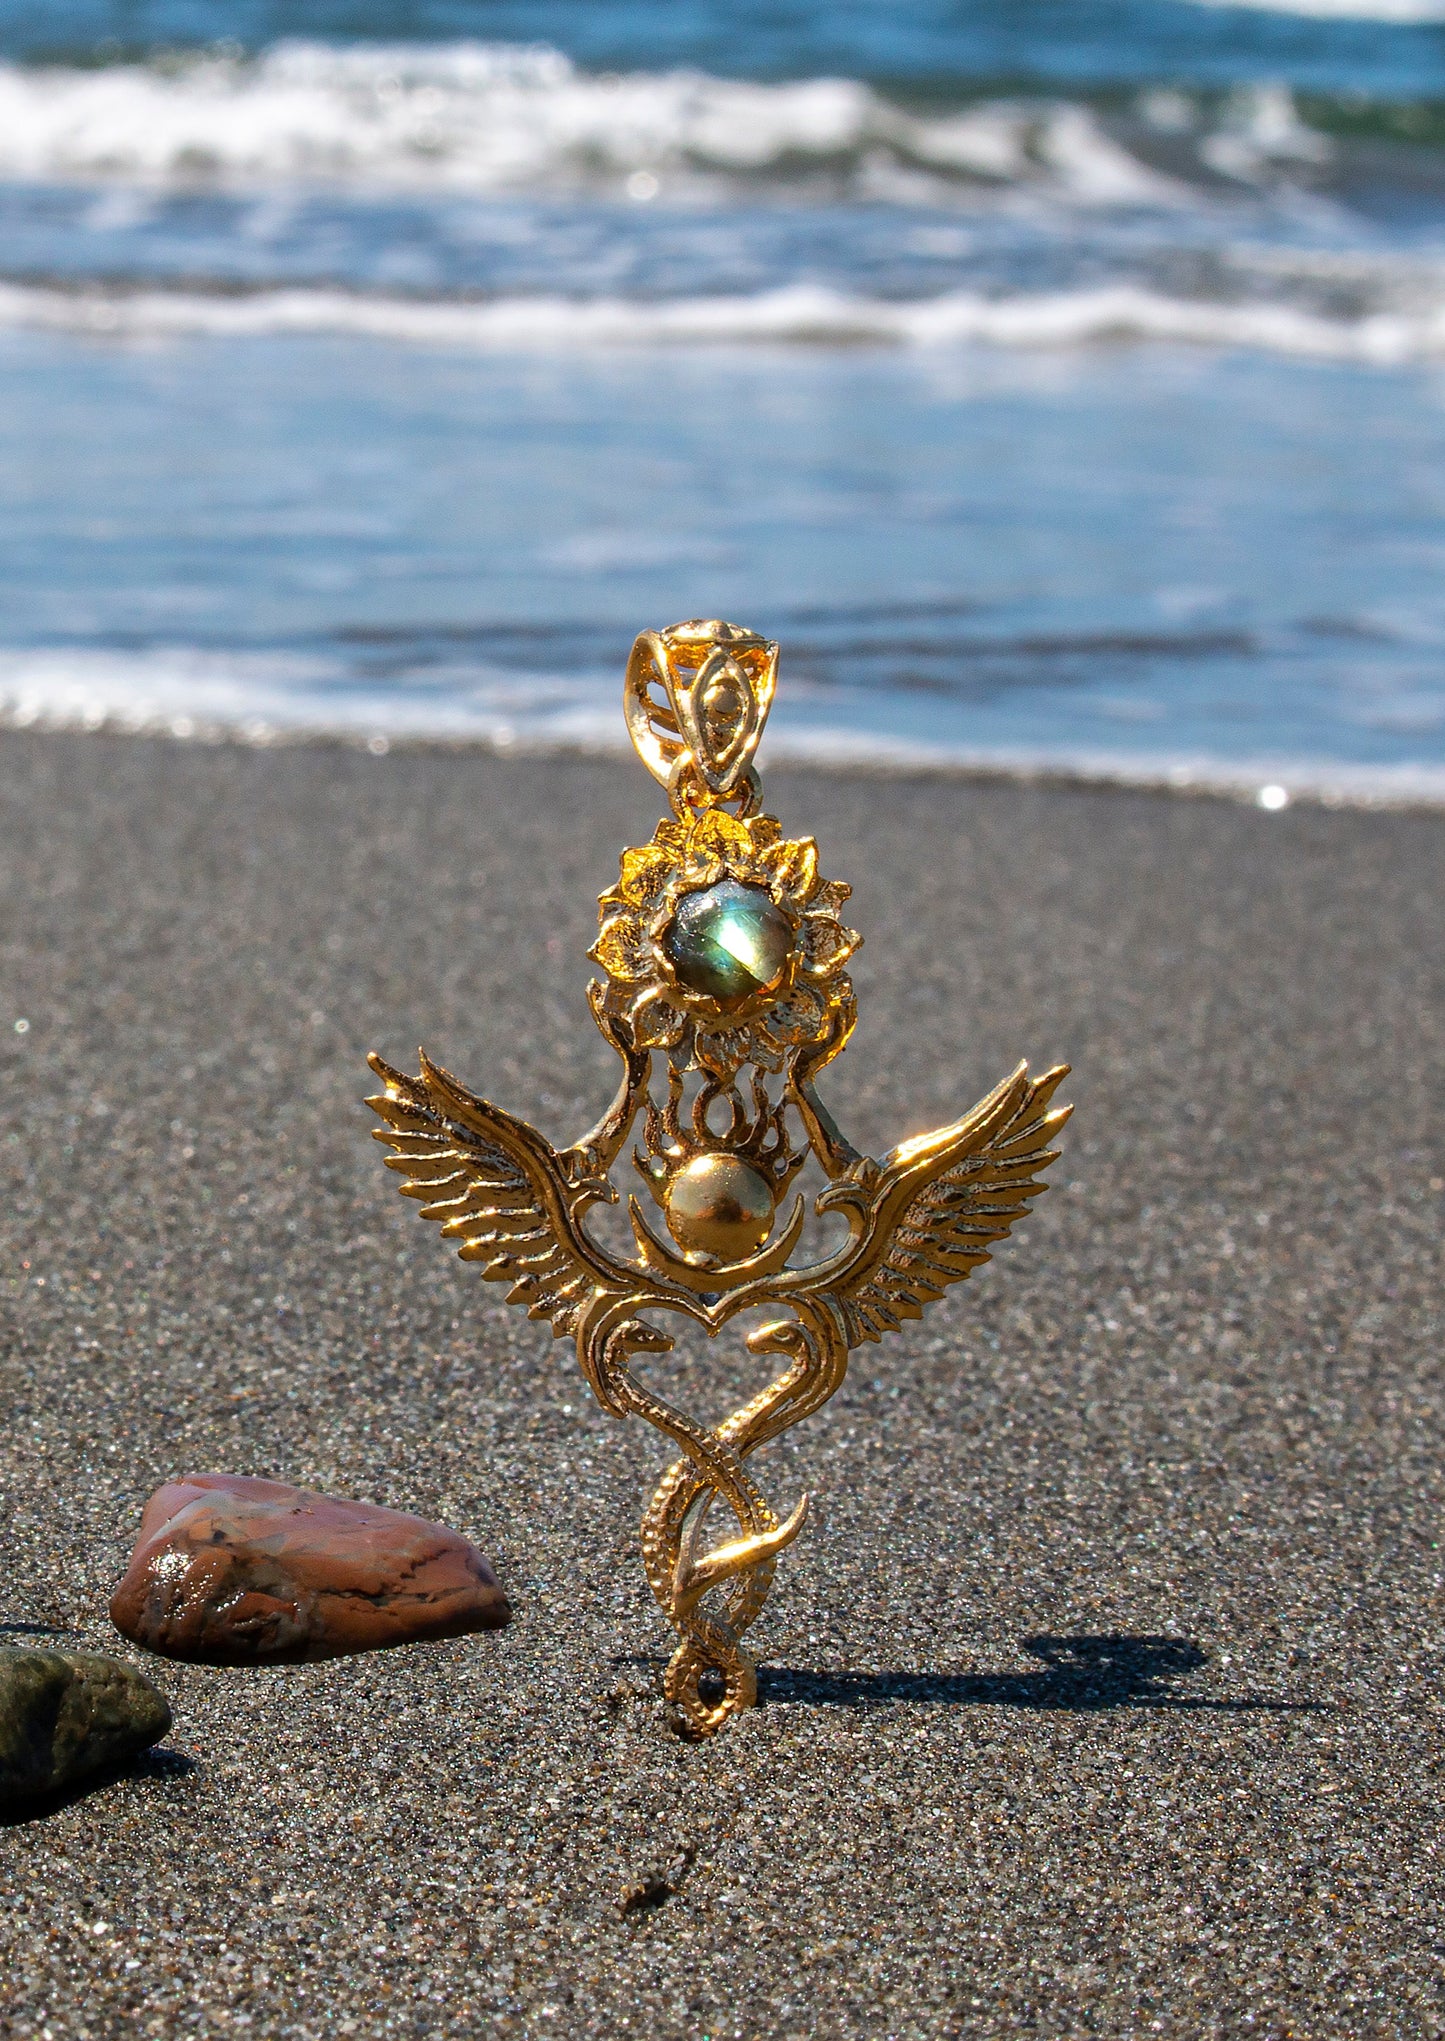 24k gold plated creation pendant